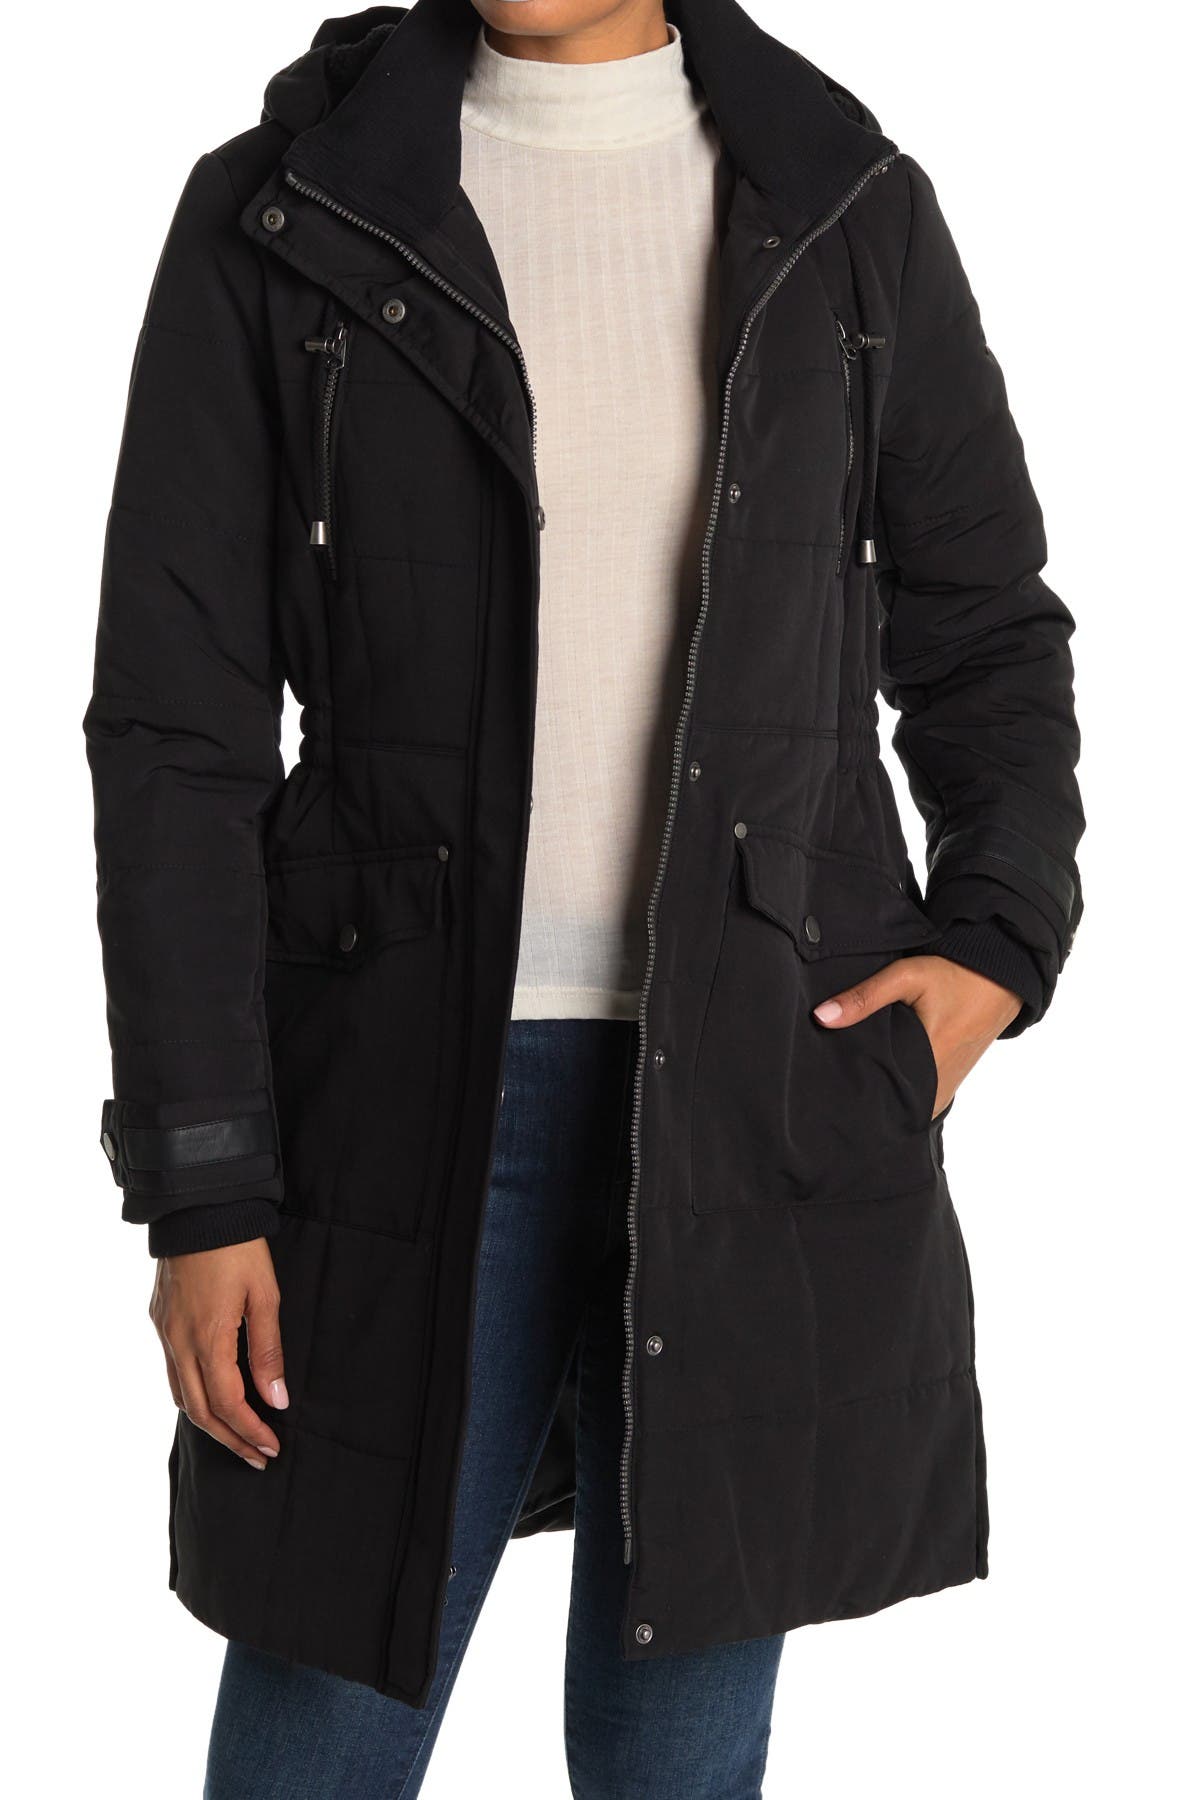 Lucky Brand | Missy Long Hooded Quilted Jacket | Nordstrom Rack